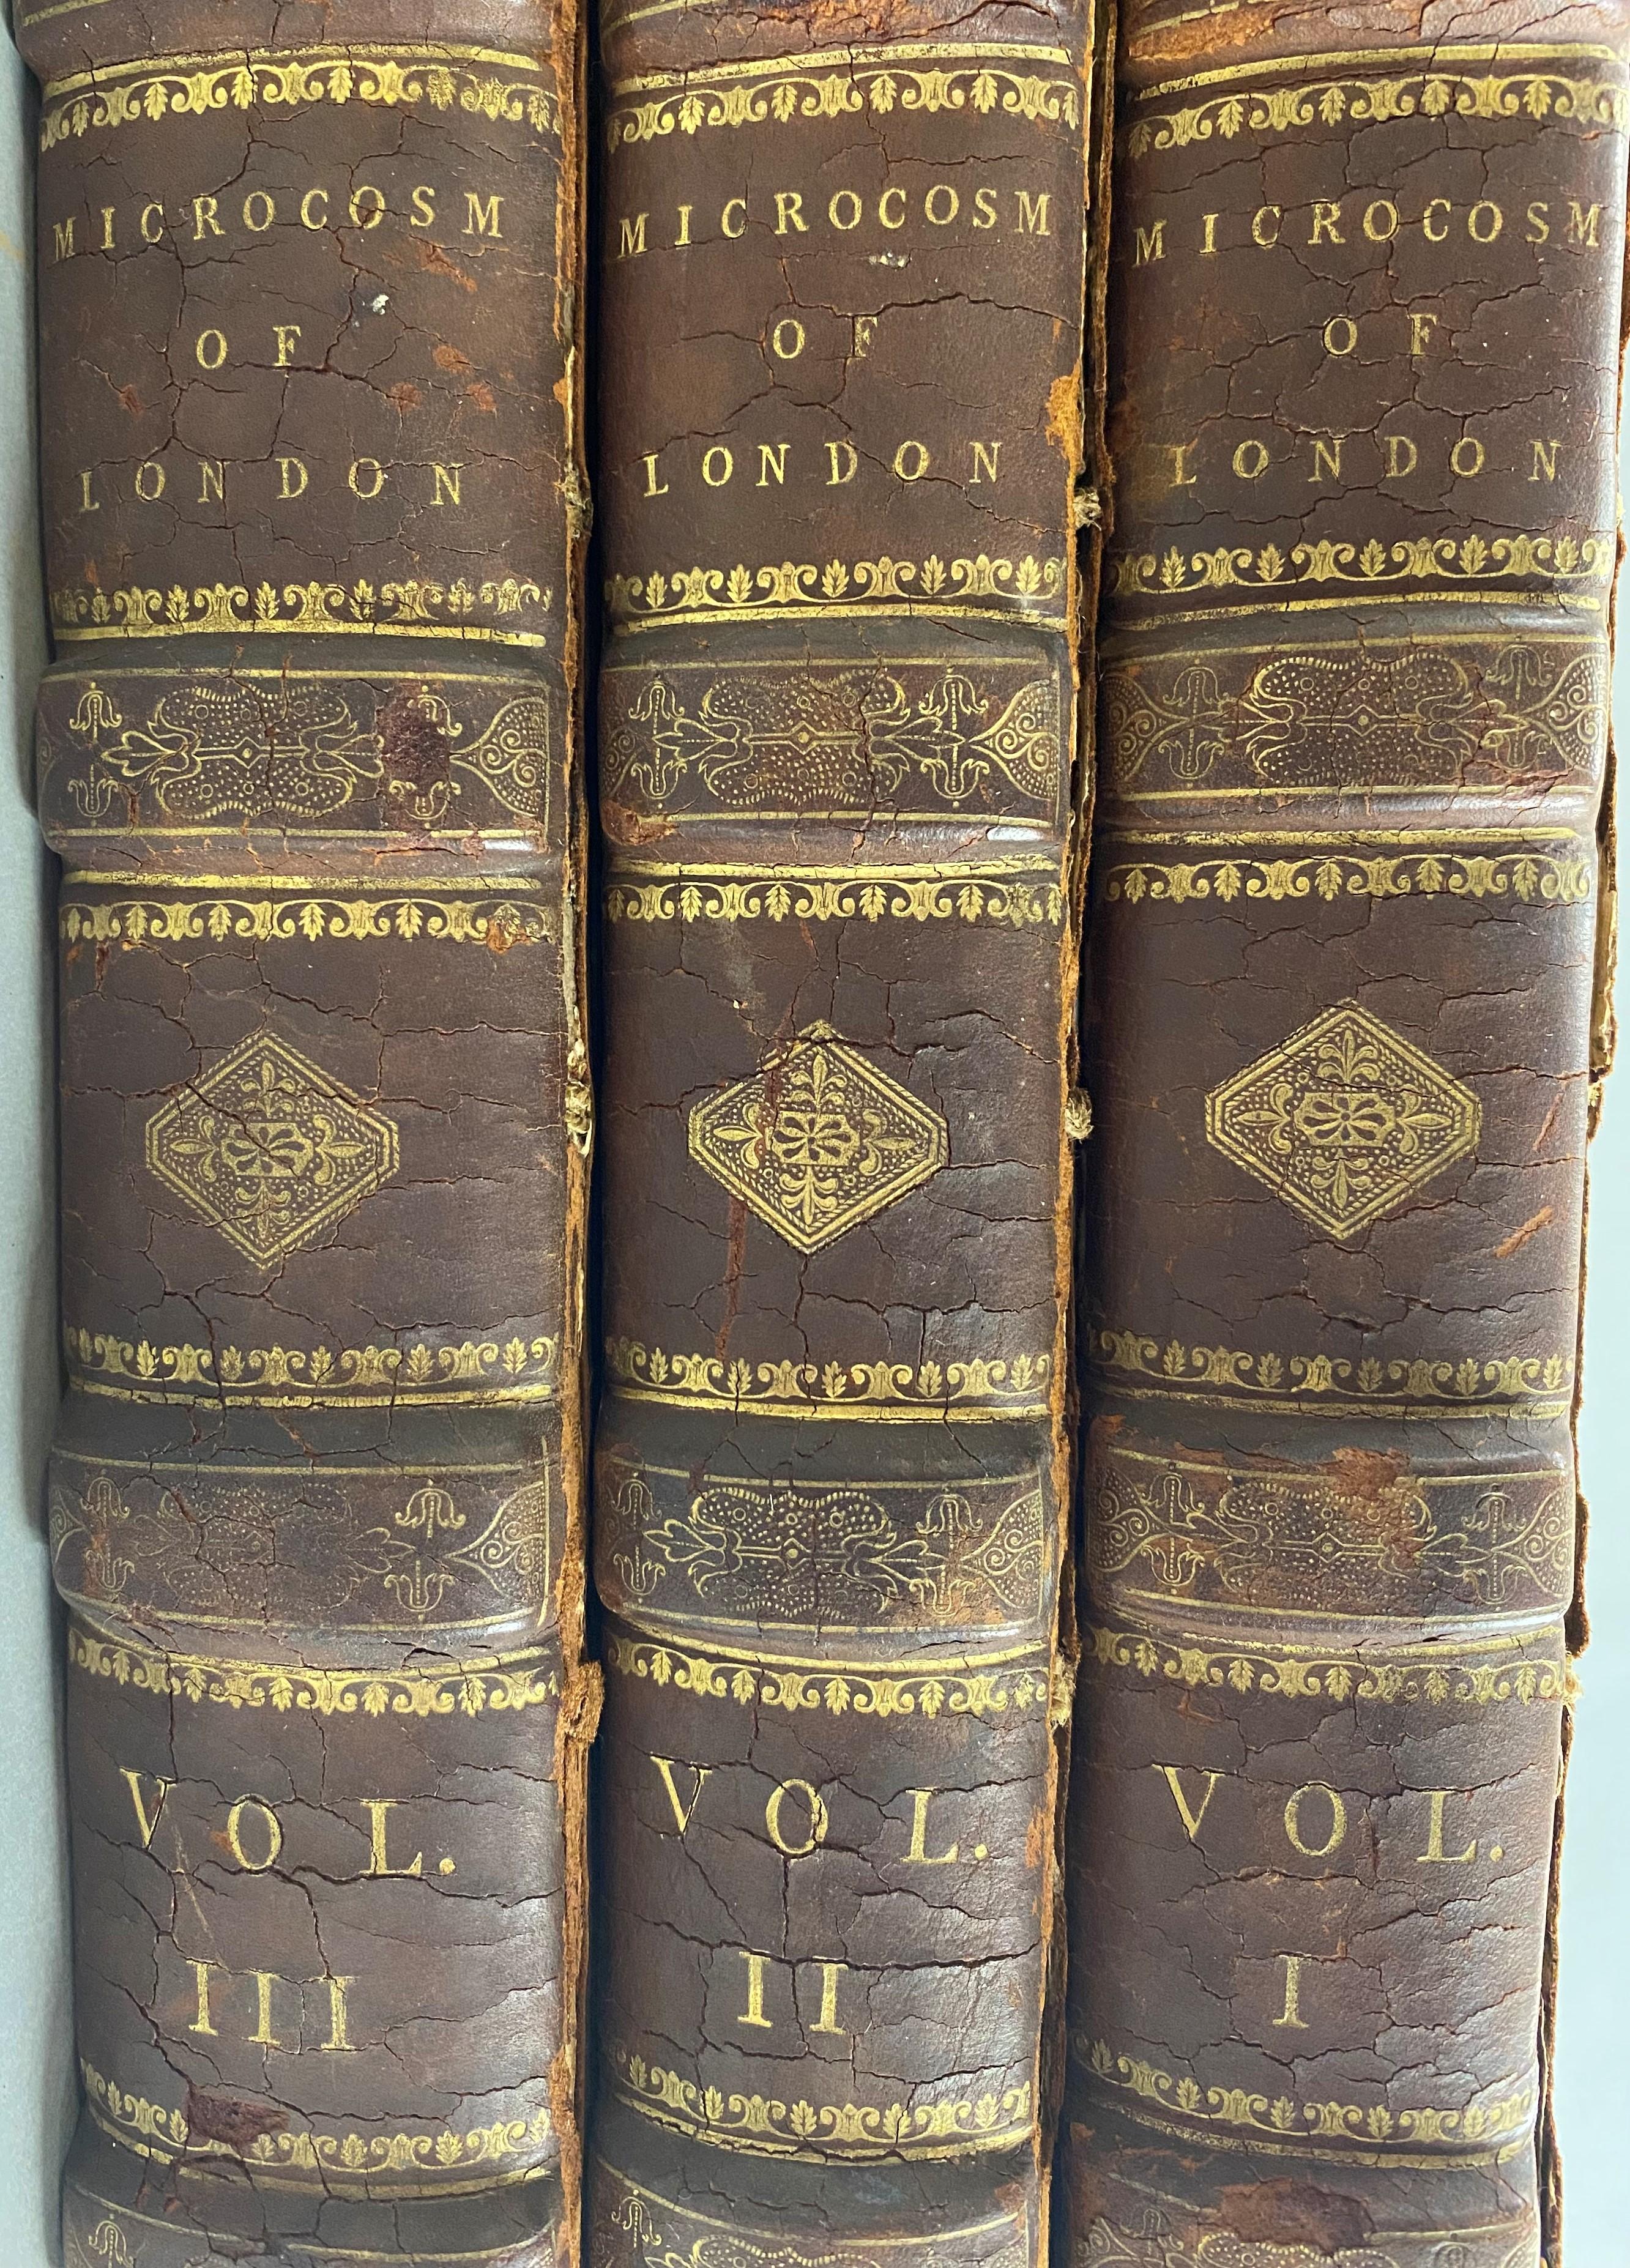 A rare leatherbound three volume book set titled “Microcosm of London or London in Miniature” published by Rudolph Ackerman (1764 - 1834), illustrated with 104 aquatint plates after Thomas Rowlandson & Augustus Charles Pugin (each plate dated 1808